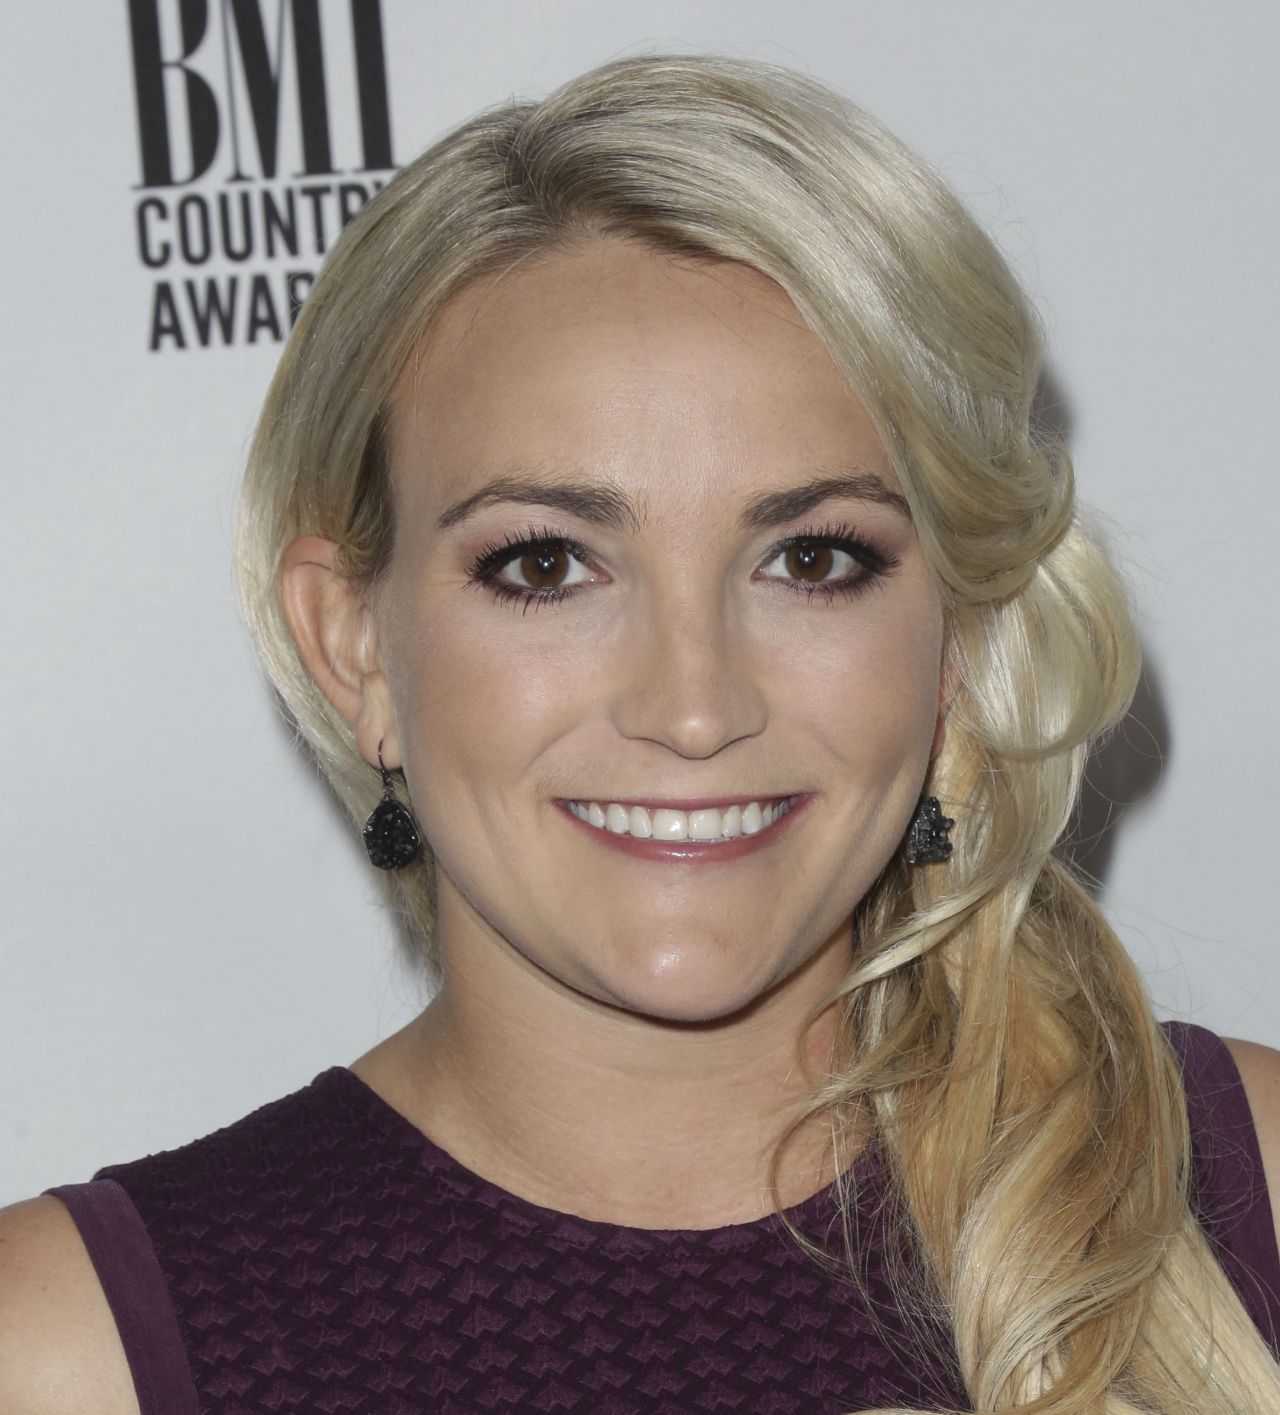 Jamie Lynn Spears – 64th Annual BMI Country Awards in Nashville 11/1 ...